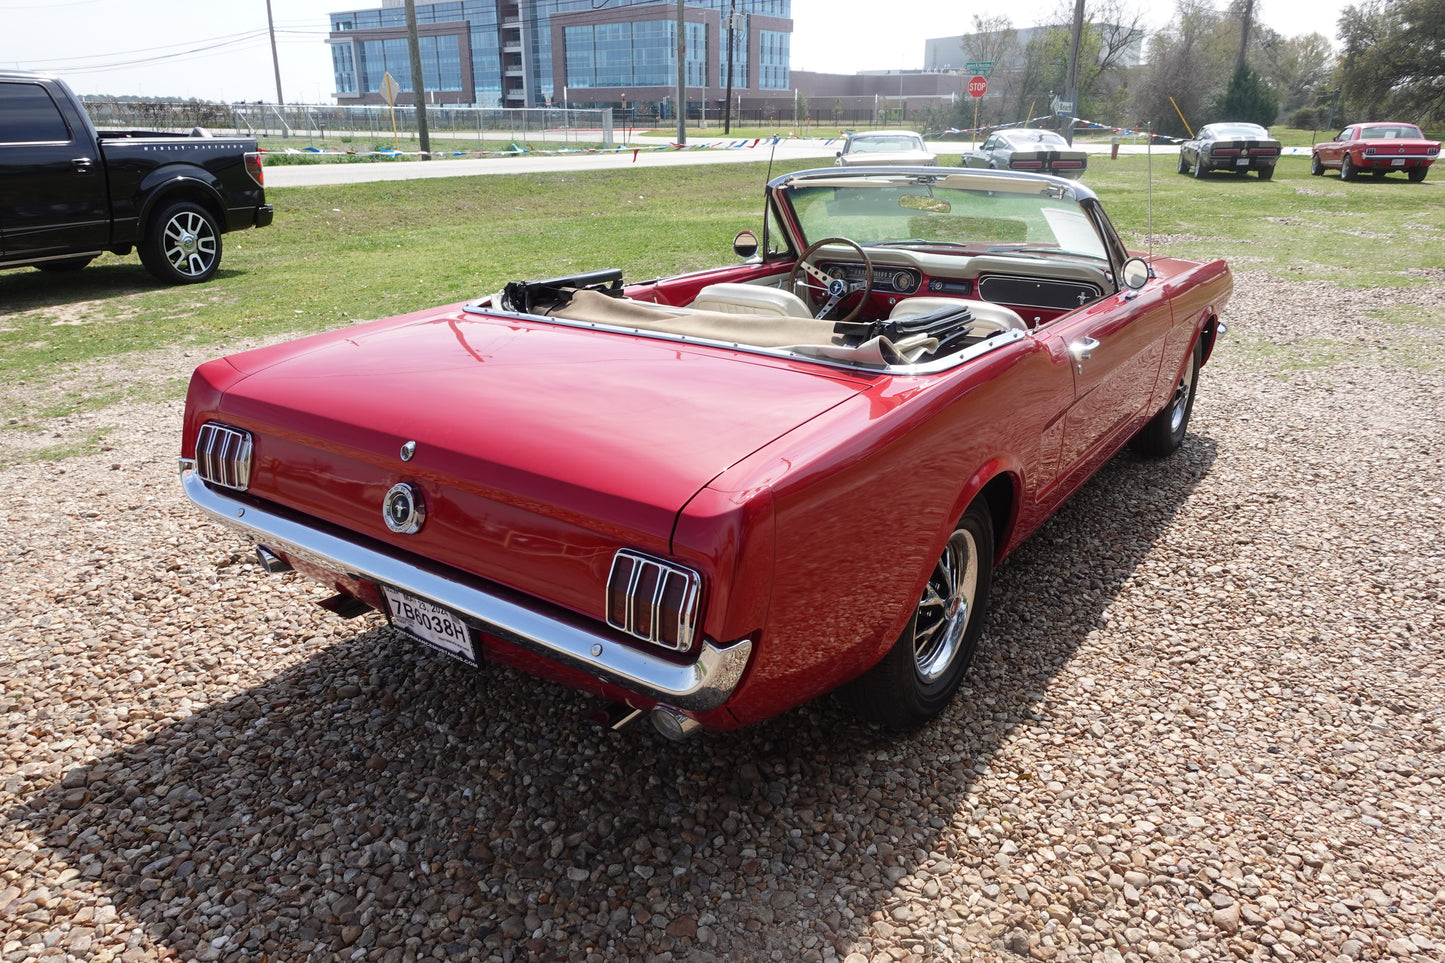 65 Mustang Convertible Red